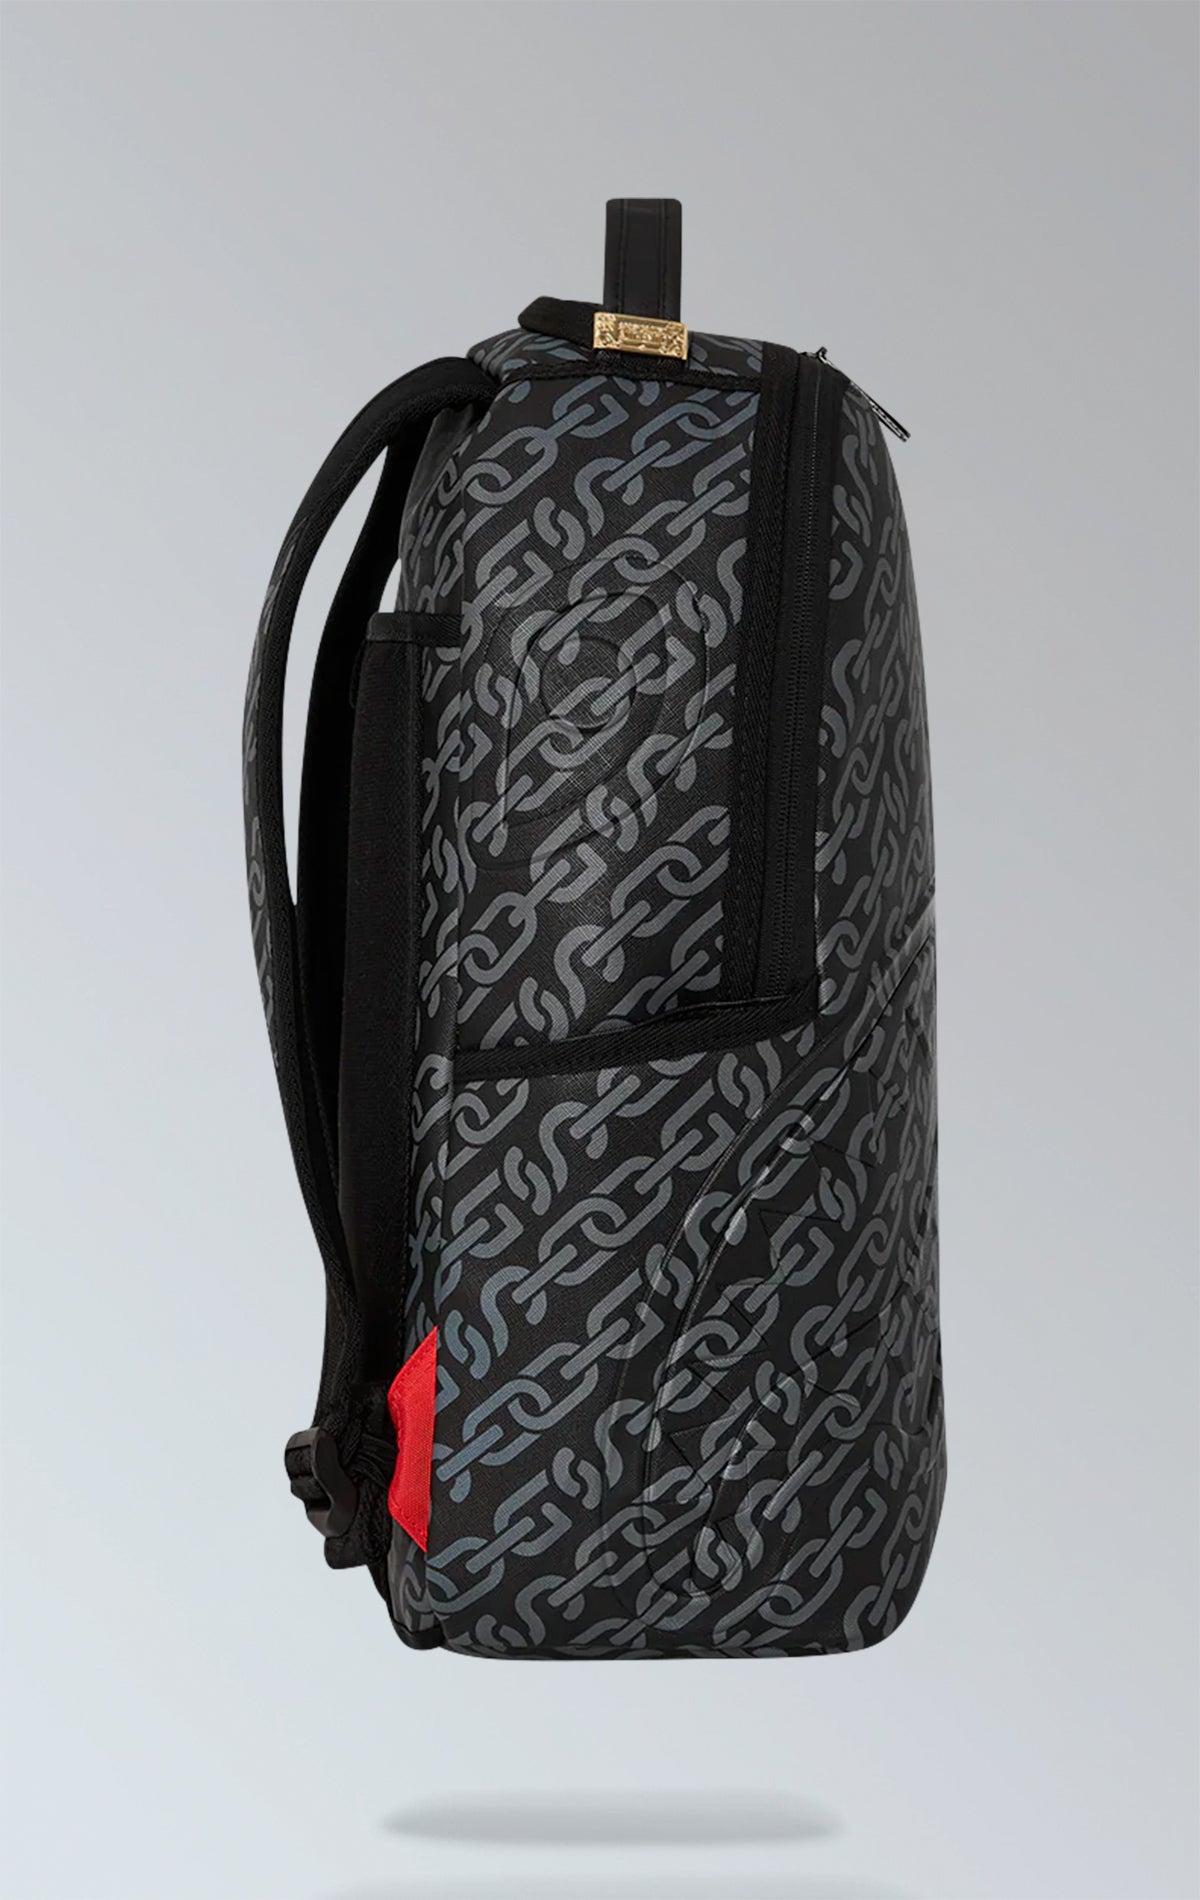 Sprayground, SG Chains Backpack, SG Chain Backpack (DLXV), black backpack,  gray chain, vegan leather, quilted, shark mouth, laptop compartment, adjustable straps, side pockets, multiple compartments.